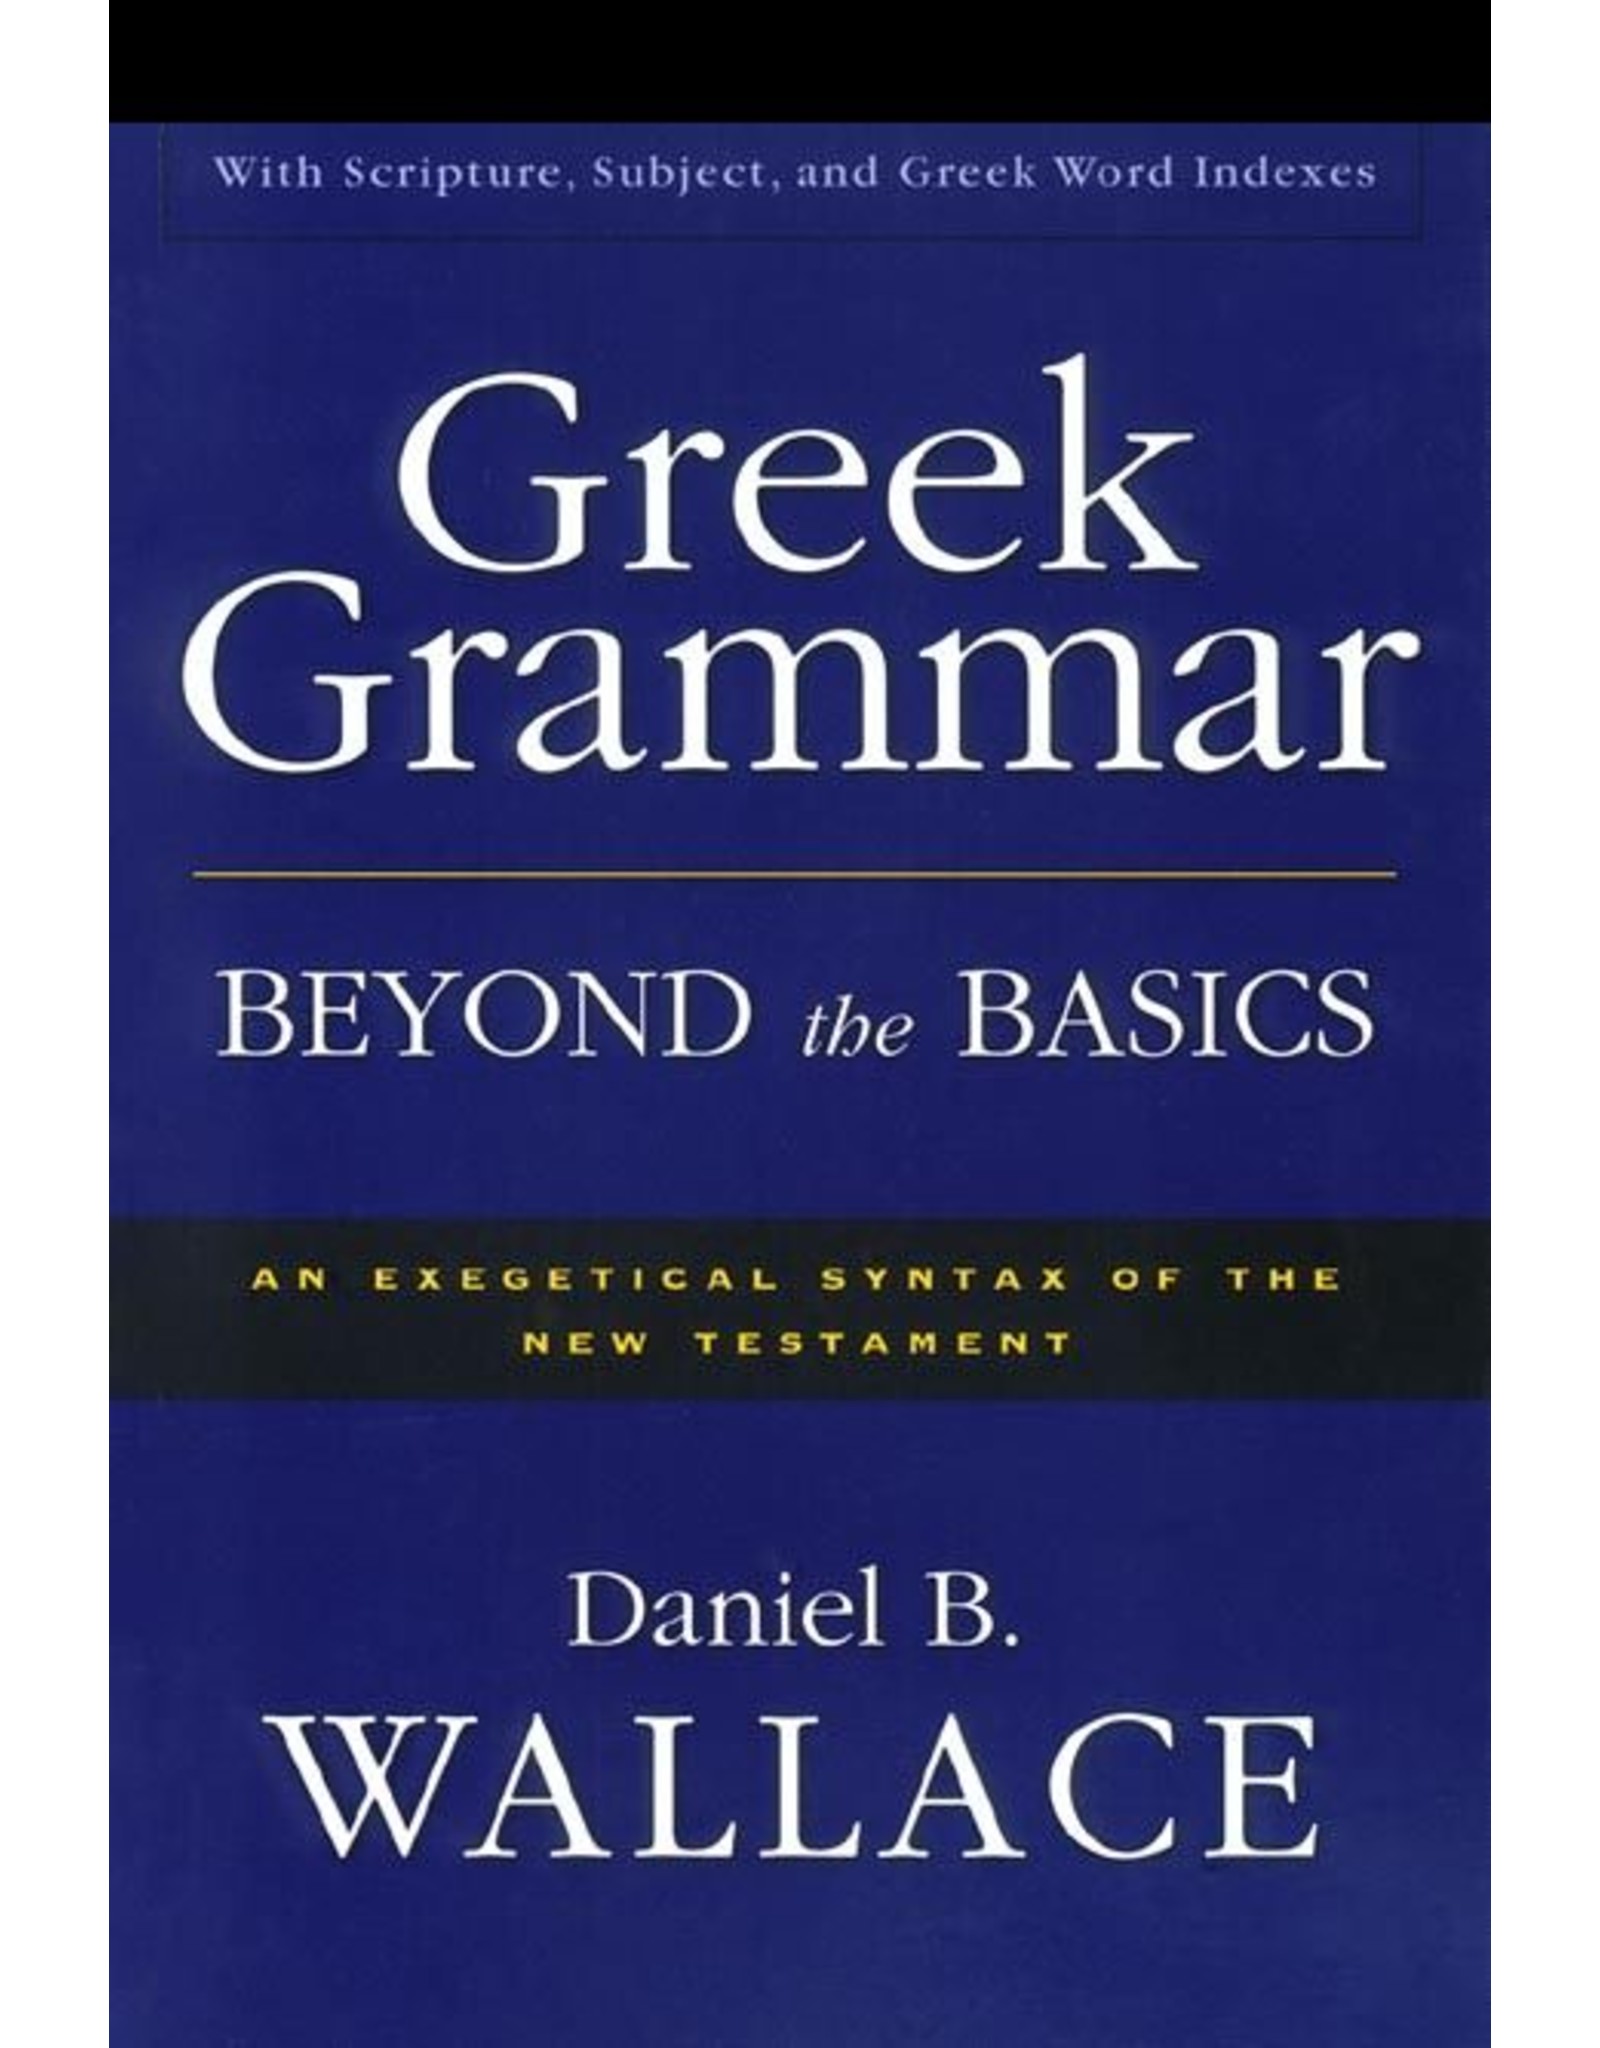 Harper Collins / Thomas Nelson / Zondervan Greek Grammar Beyond the Basics: An Exegetical Syntax of the New Testament with Scripture, Subject, and Greek Word Indexes